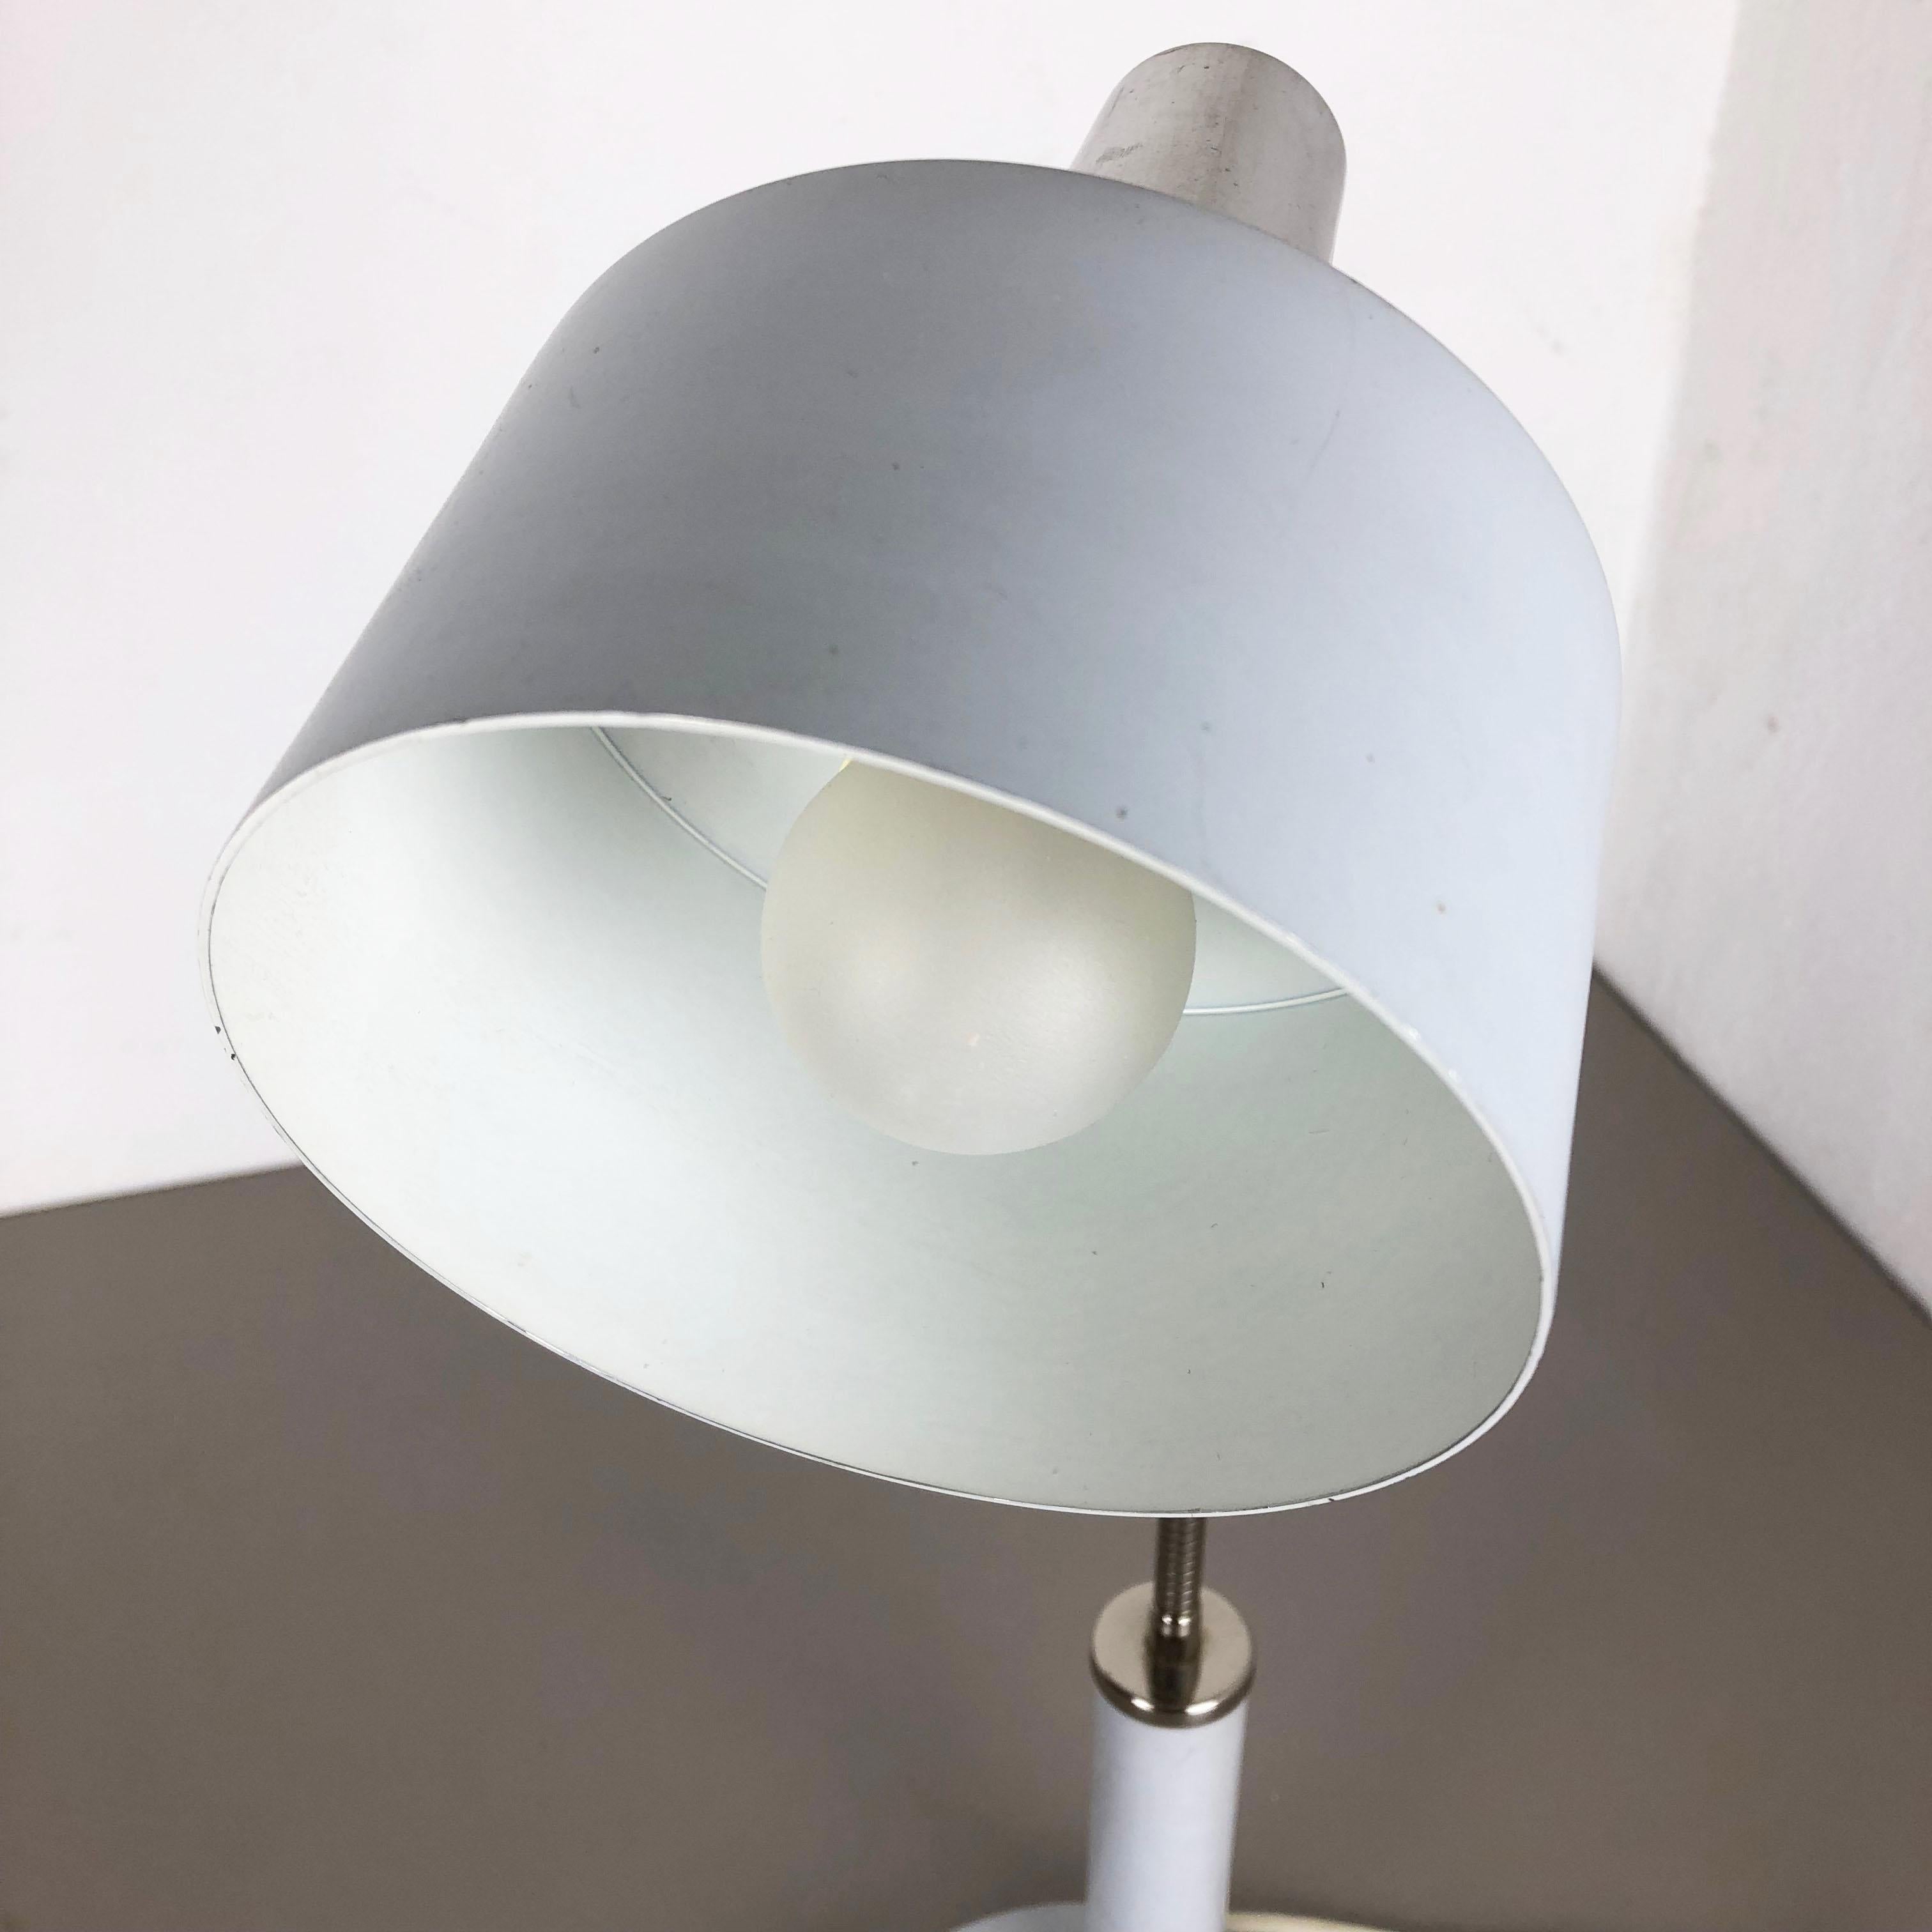 Original Modernist 1960s Metal Table Light Made by SIS Lights Attrib., Germany For Sale 6